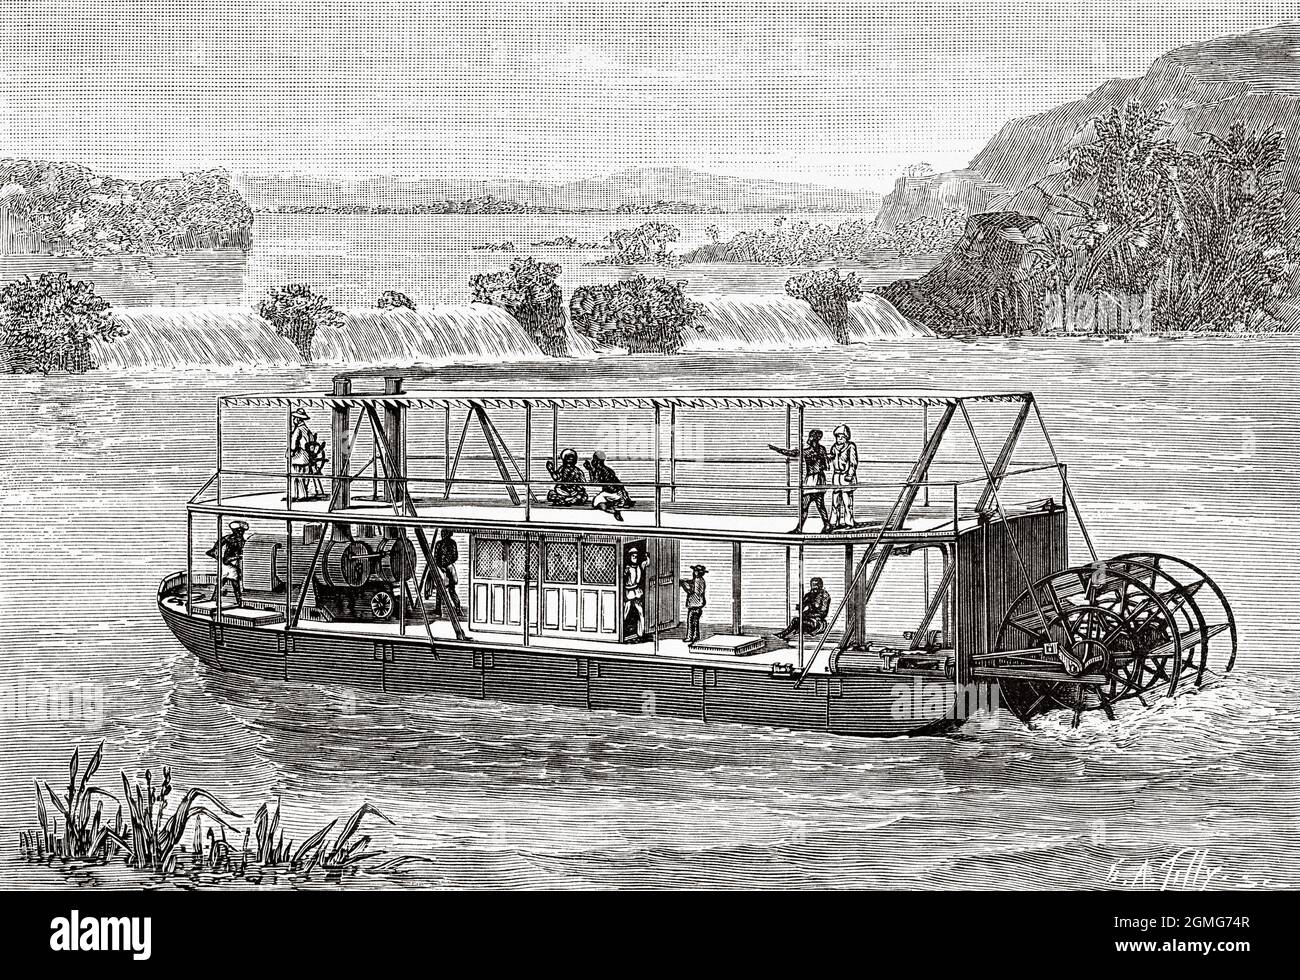 https://c8.alamy.com/comp/2GMG74R/detachable-and-portable-steamship-the-stanley-it-was-built-for-the-journey-of-henry-morton-stanley-on-the-congo-river-africa-old-19th-century-engraved-illustration-from-la-nature-1883-2GMG74R.jpg